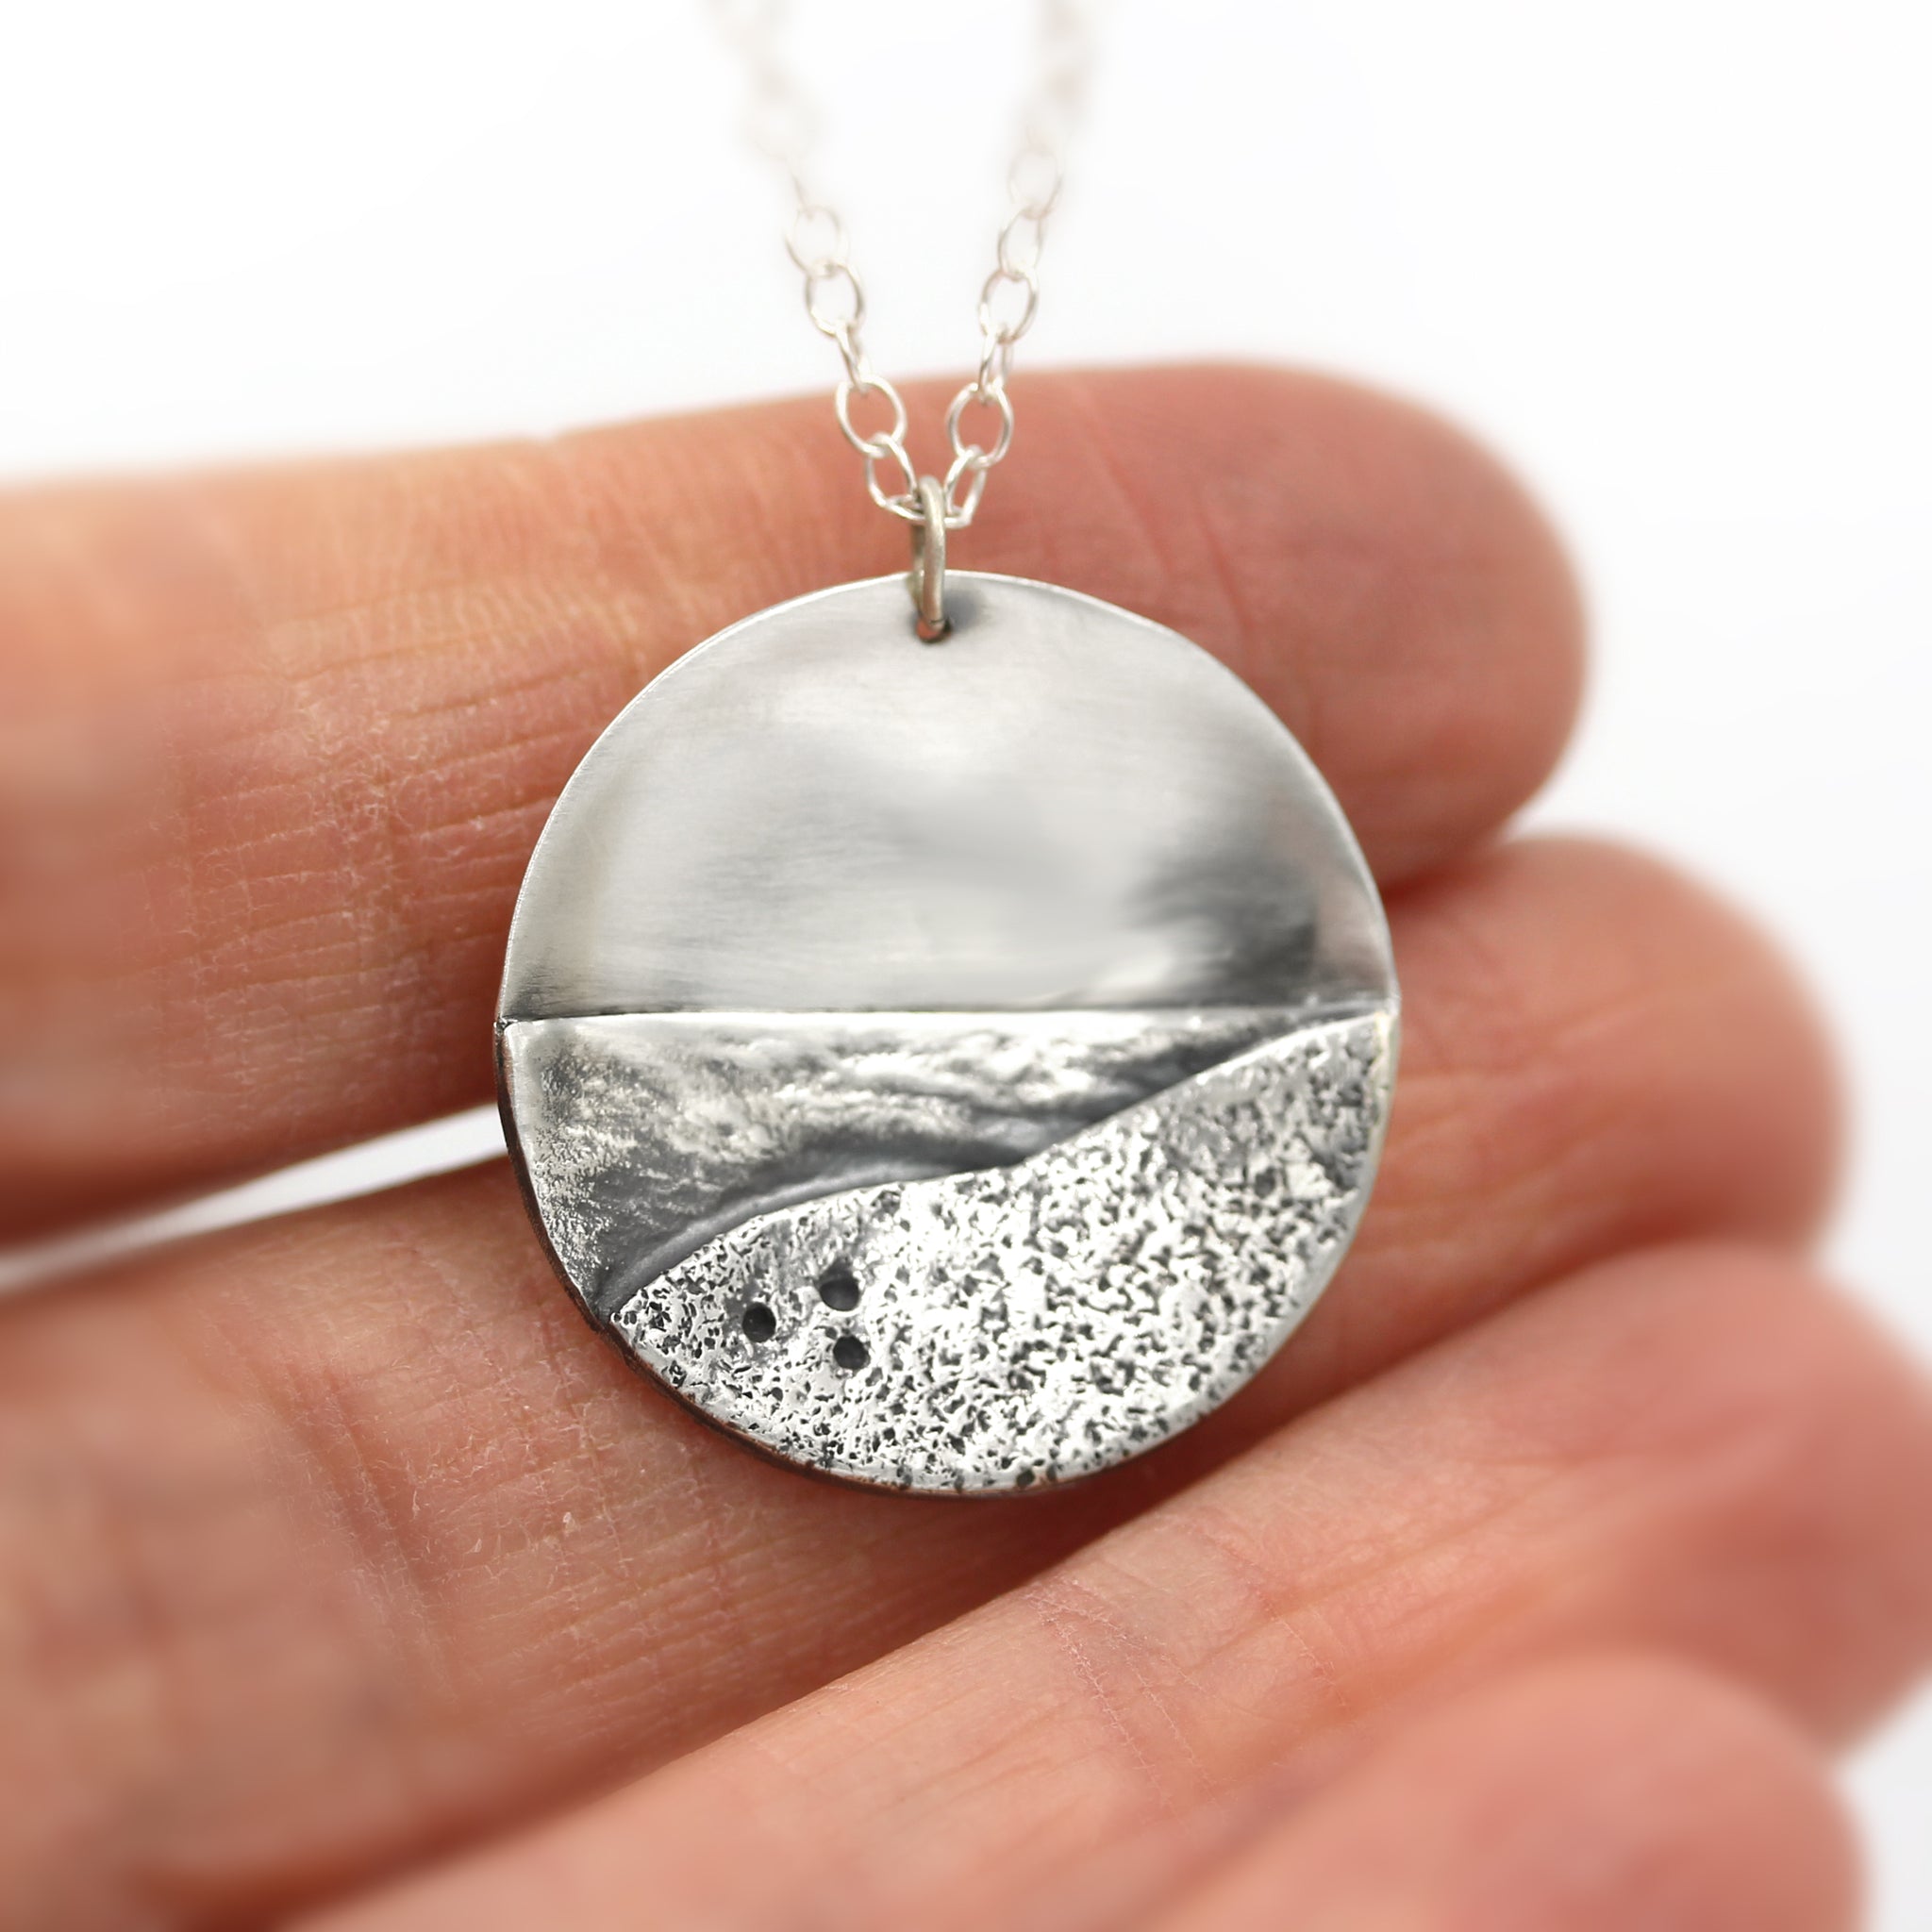 Sterling silver necklace, showing a moonlit beach. Handnmade recycled silver necklace.